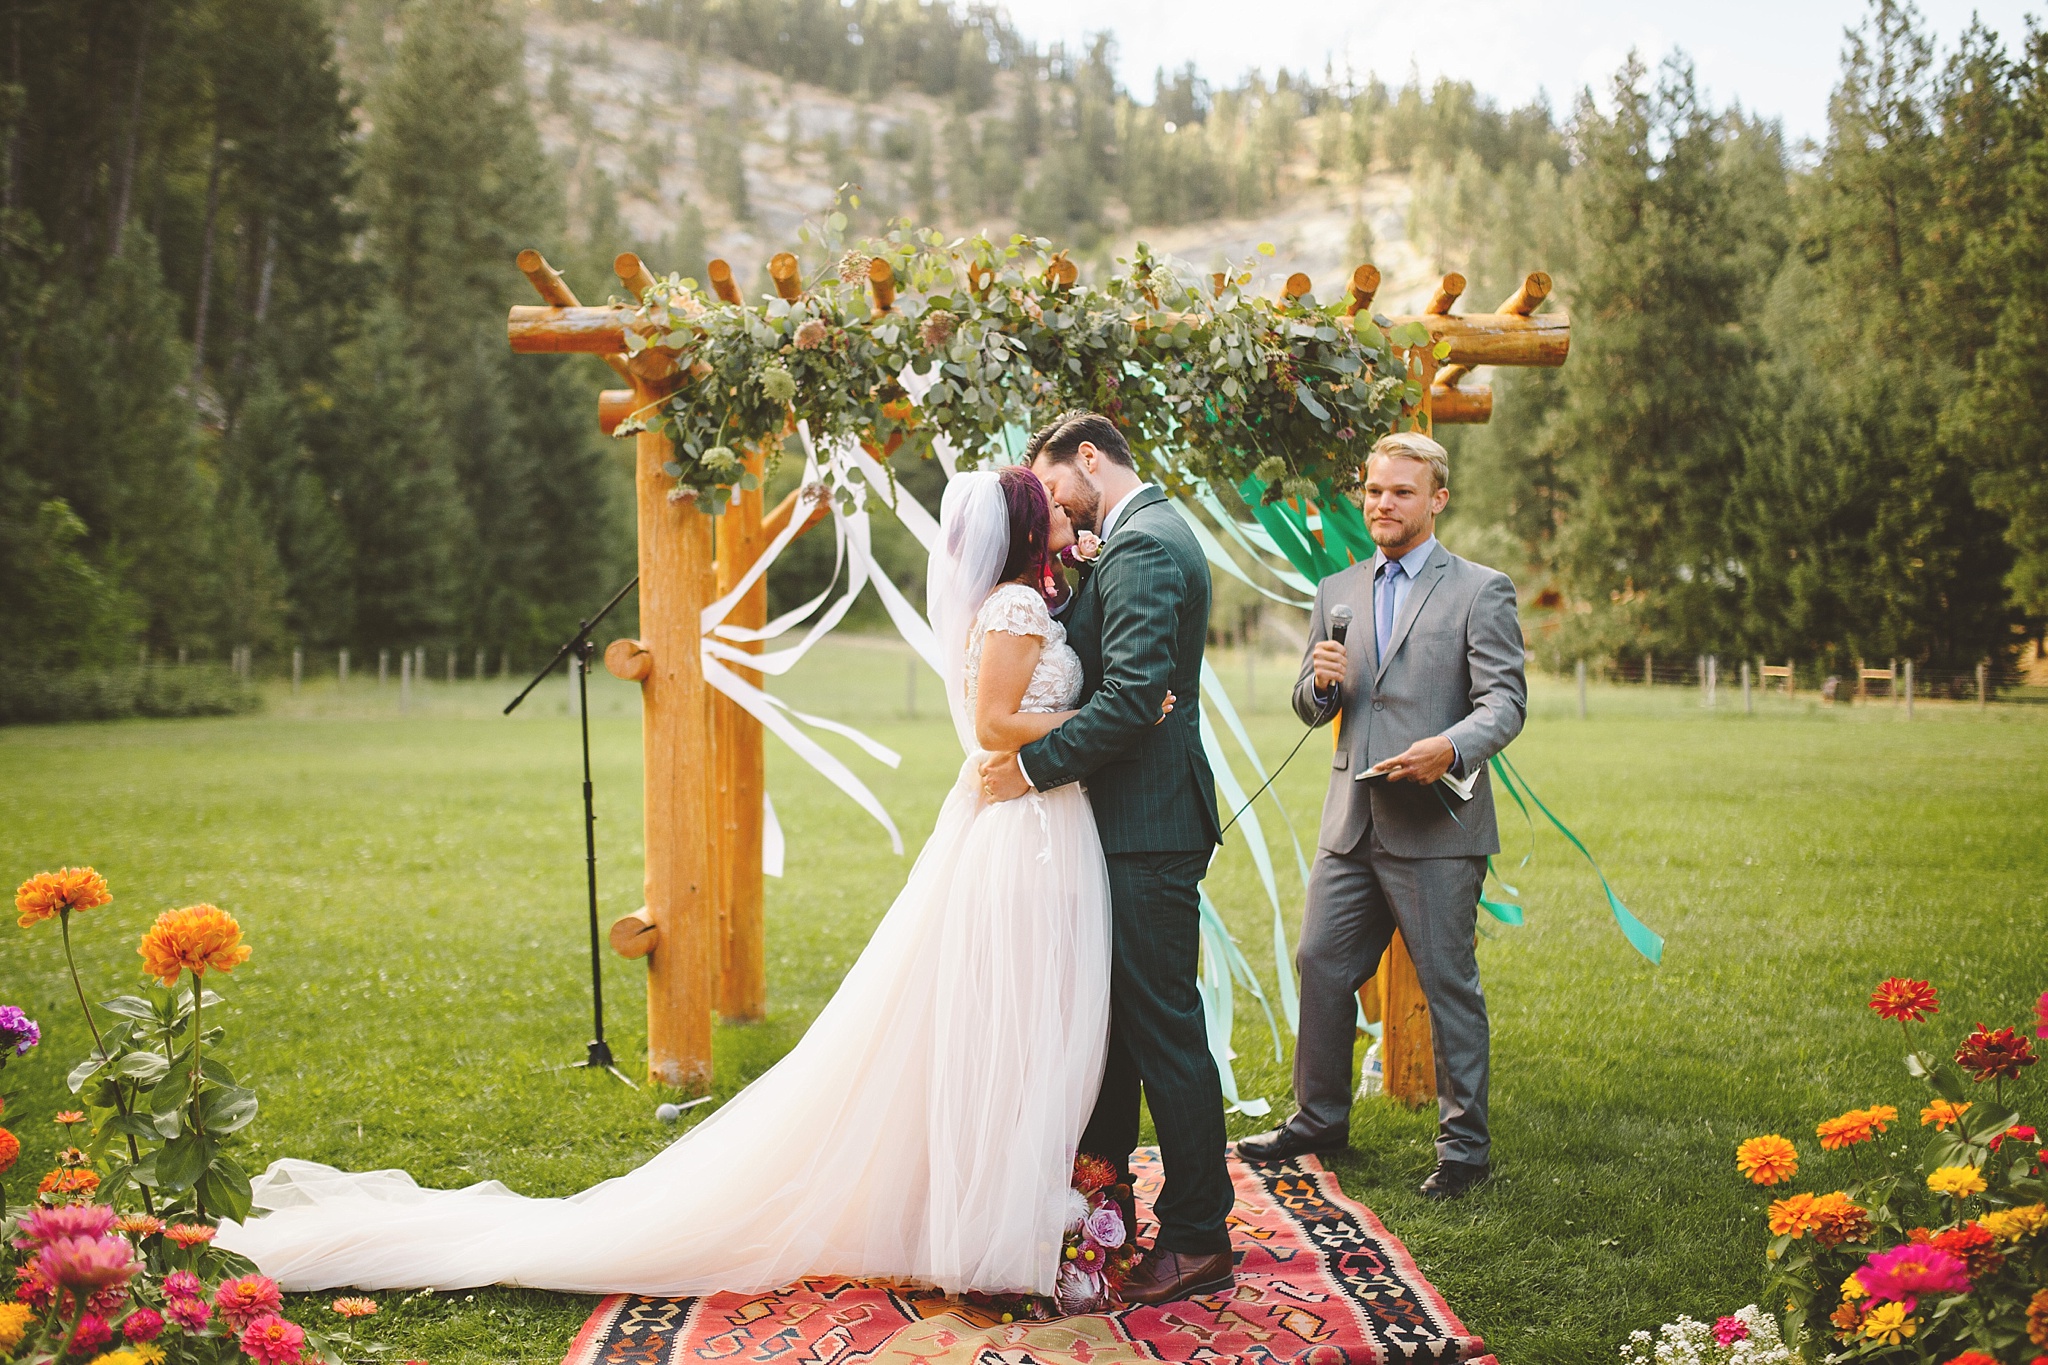 first kiss at wedding in woods of washington